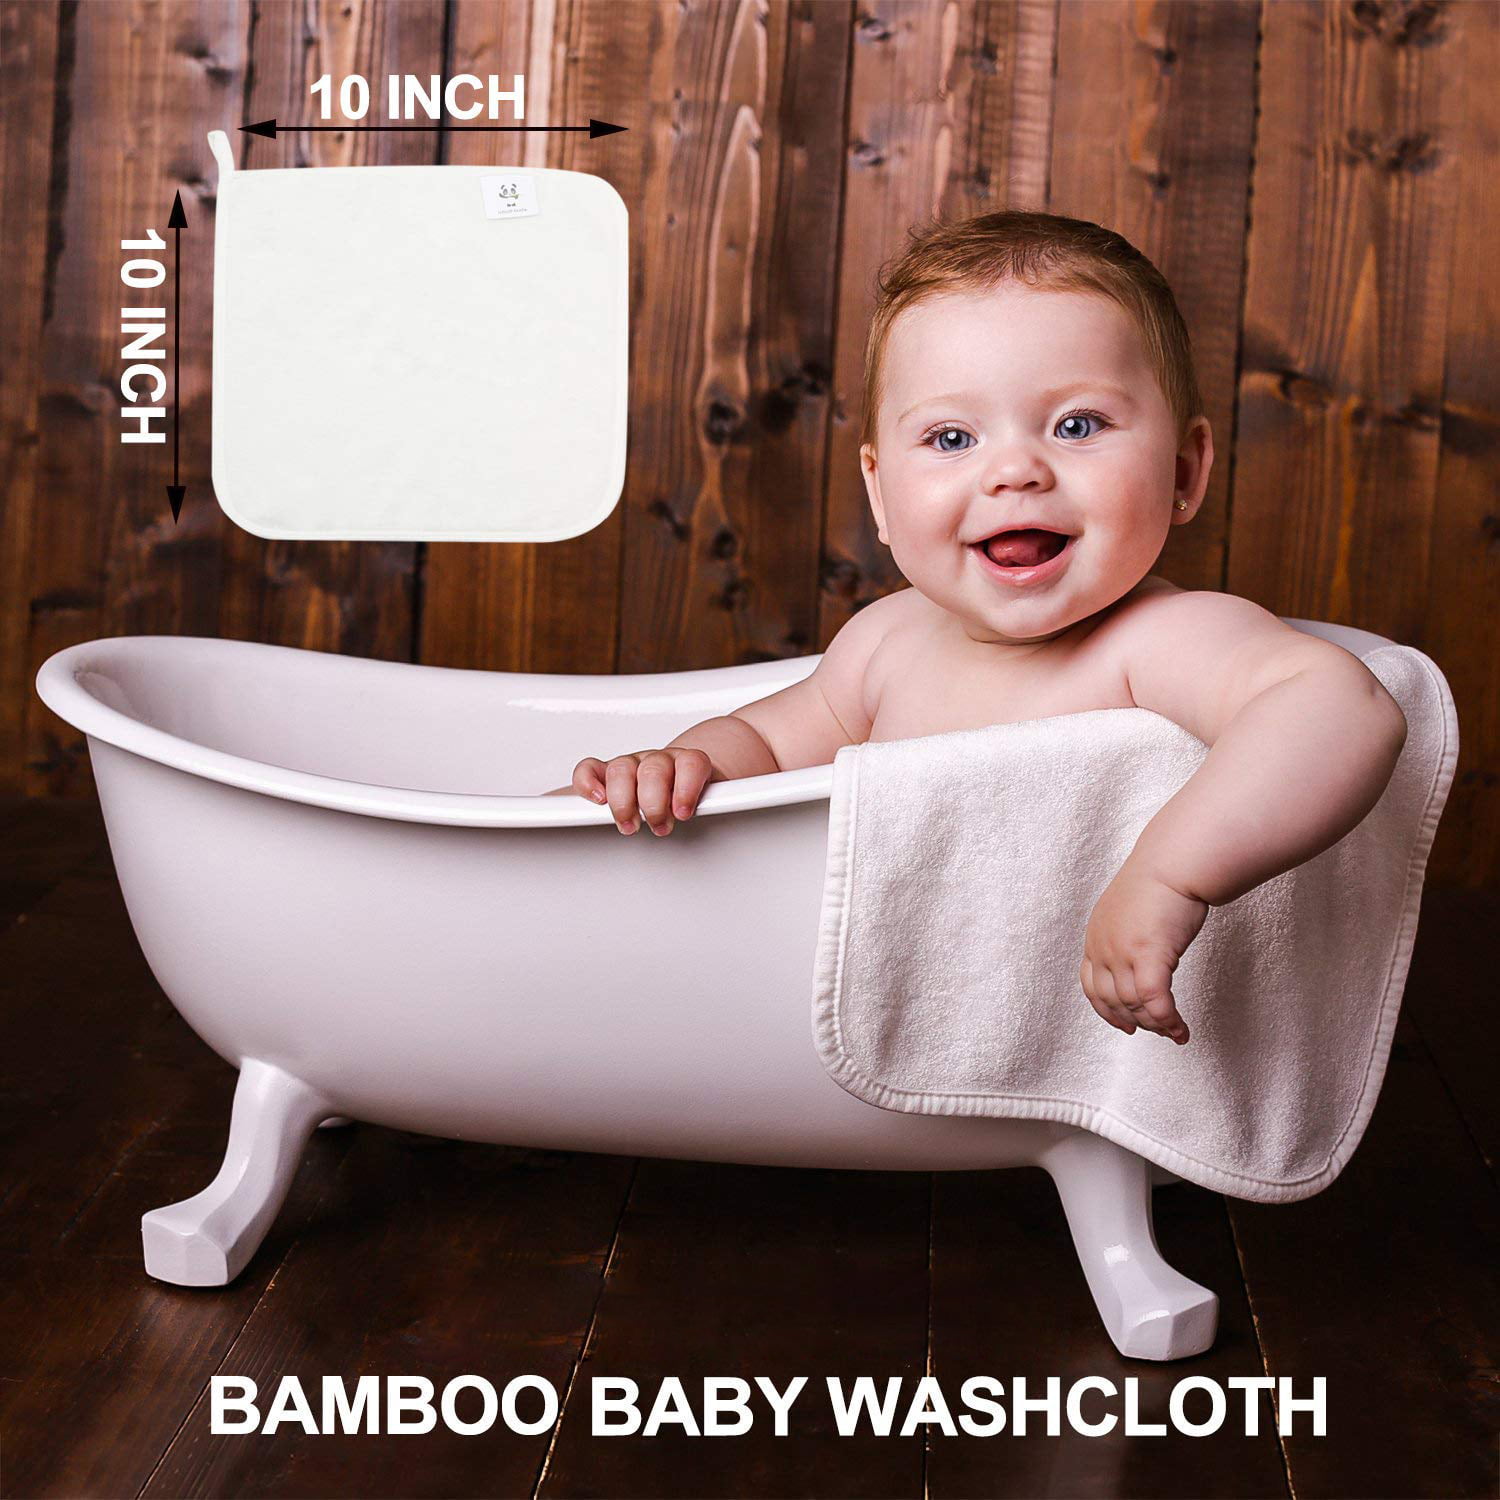 Face Towel for Baby and Adult Baby Washcloths Baby Register Item and Shower Gift Natural Reusable Wipes for Delicate Skin Soft Bamboo Towel Assorted, 6 Pack 